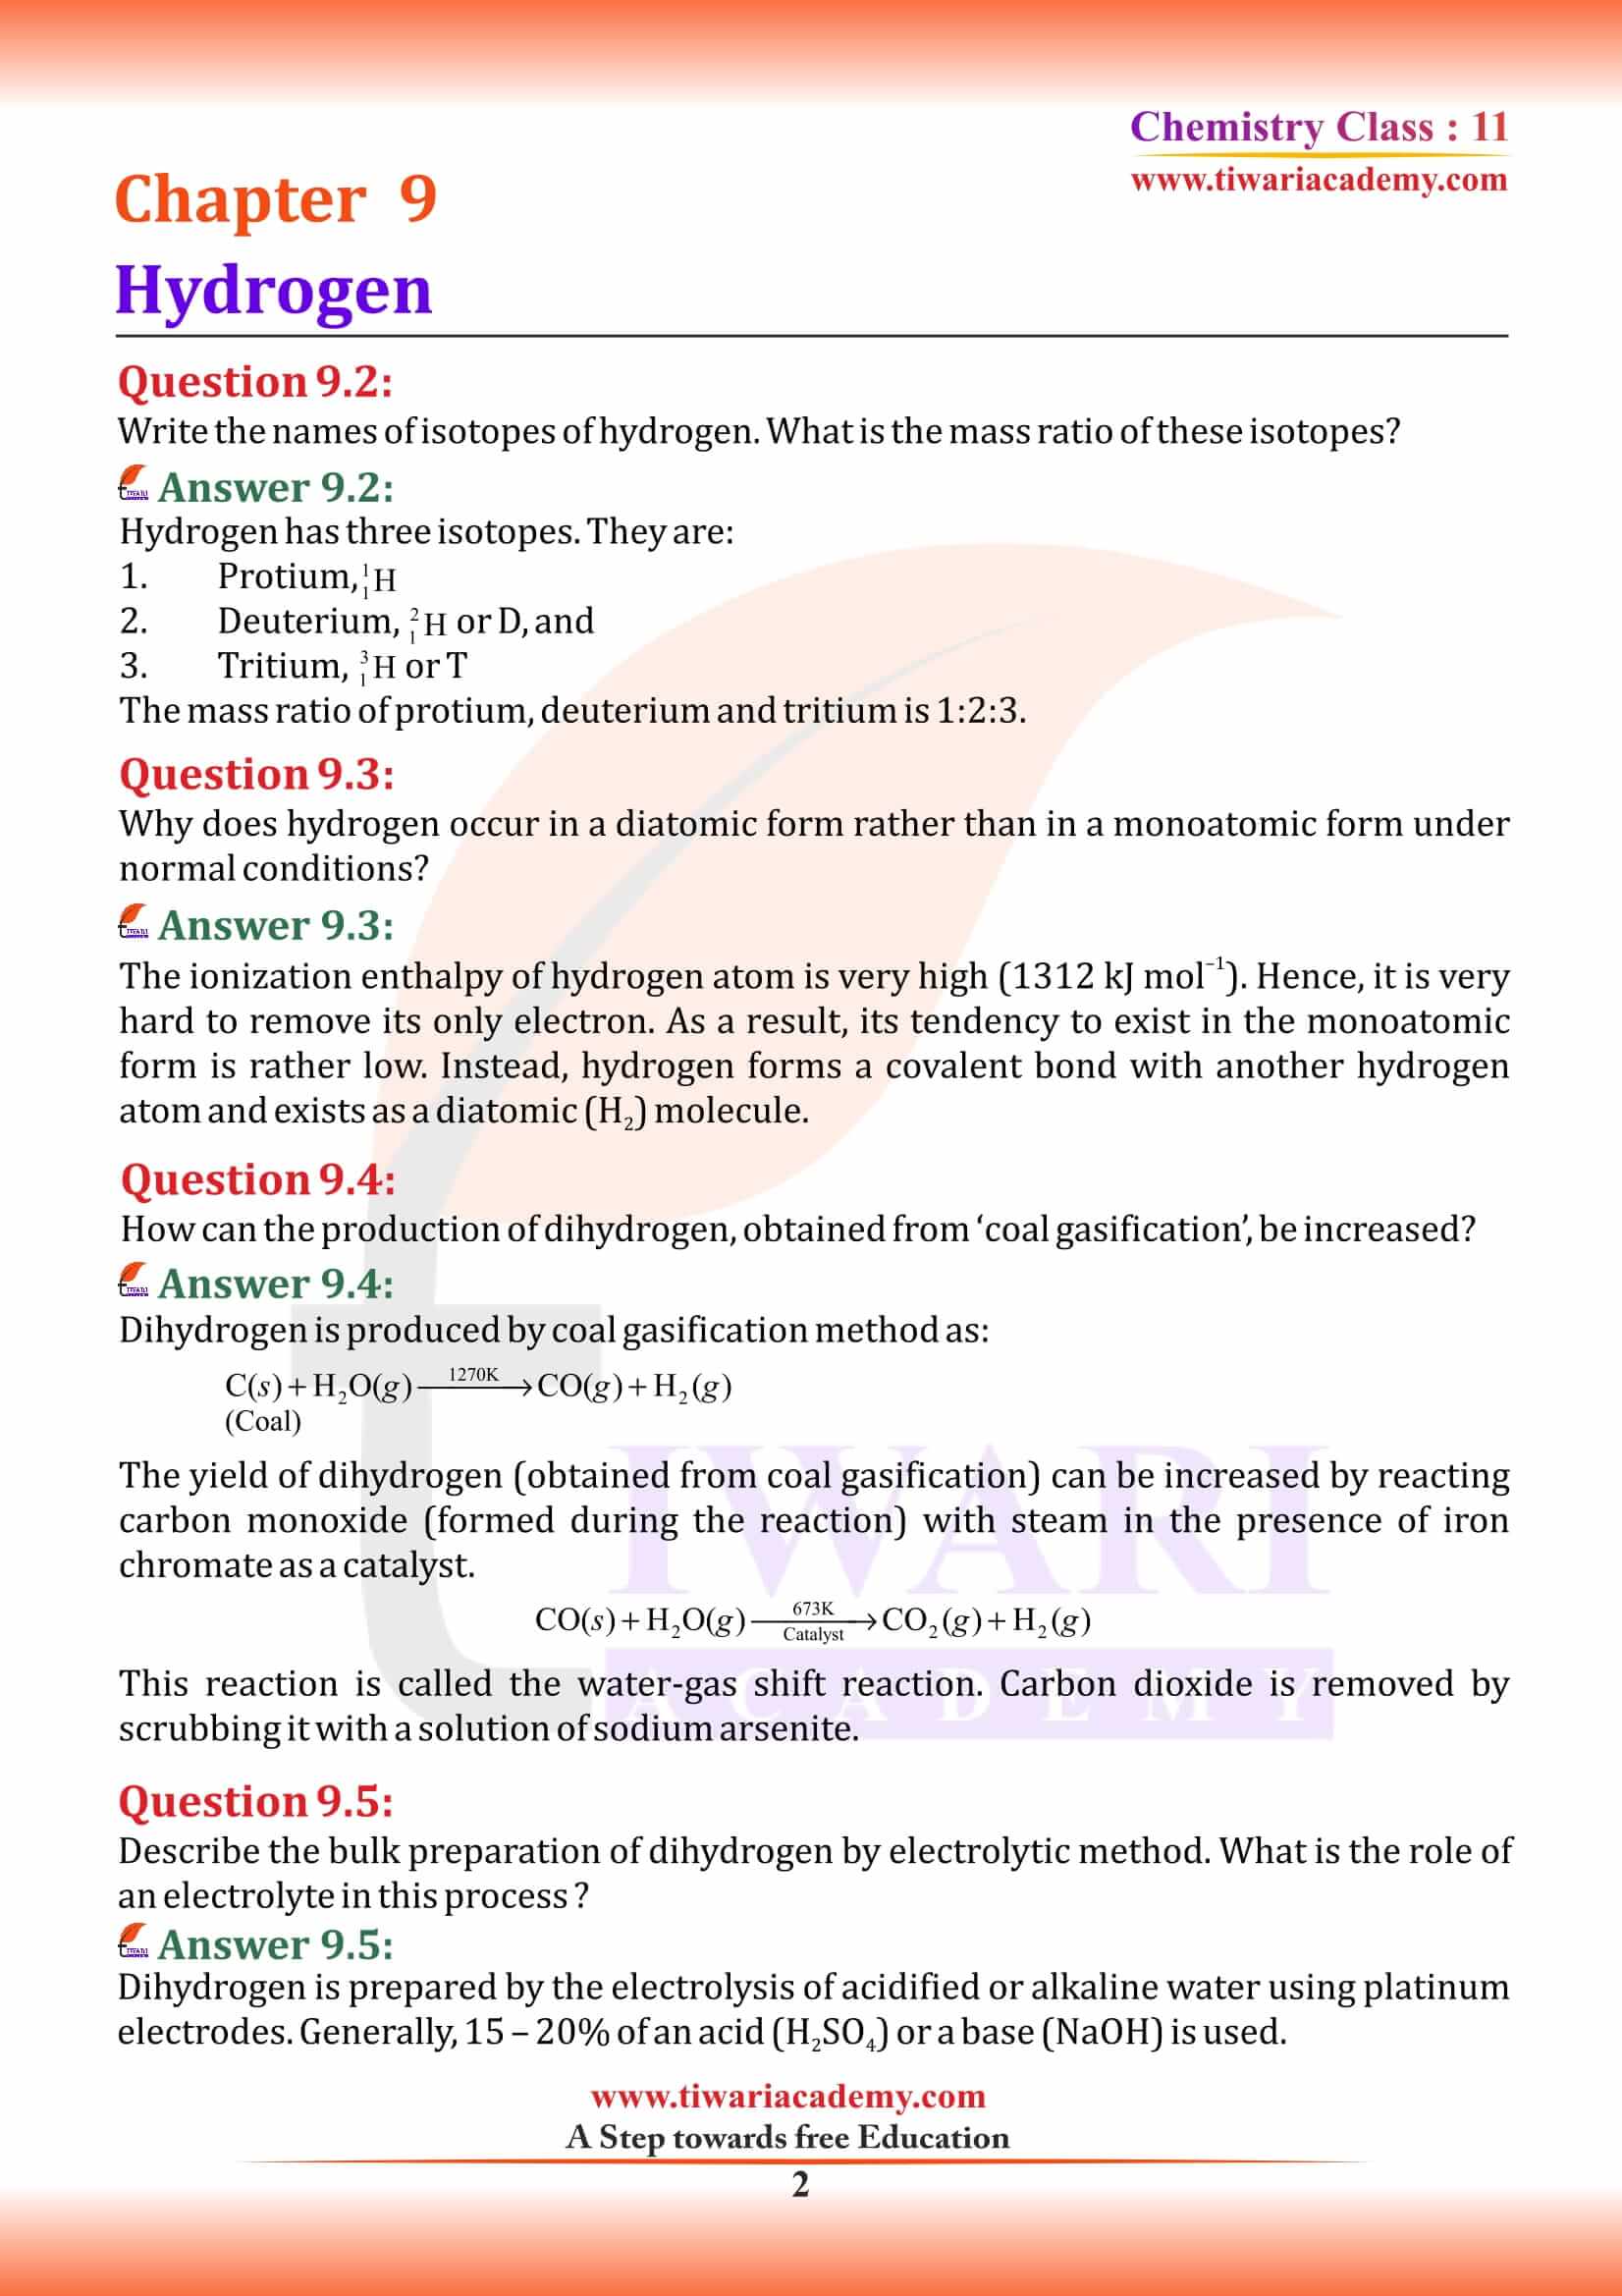 NCERT Solutions for Class 11 Chemistry Chapter 9